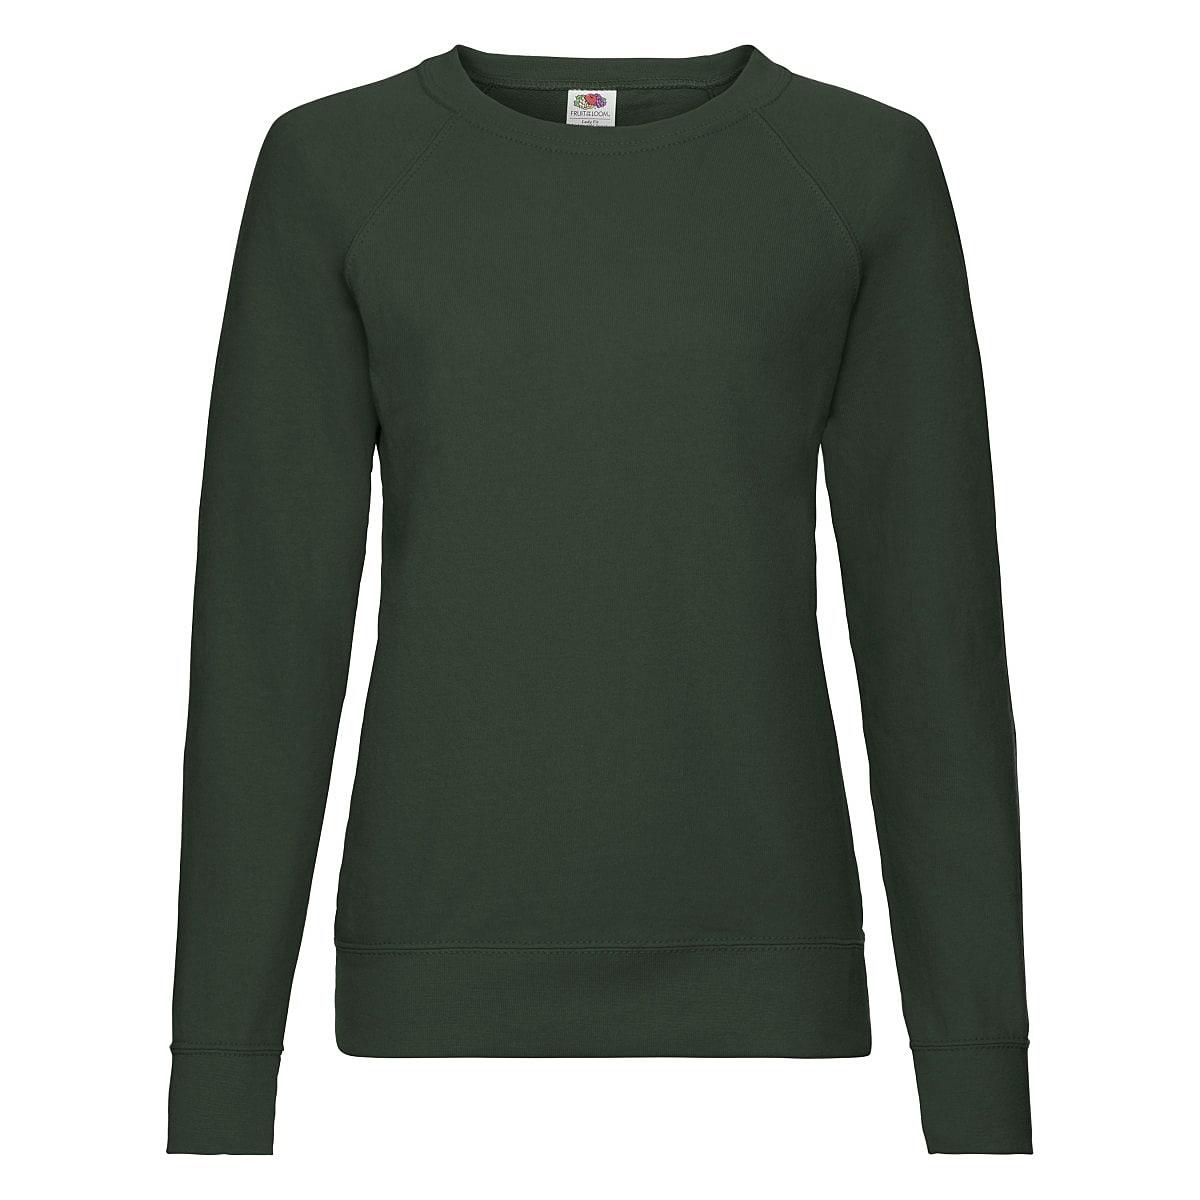 Fruit Of The Loom Lady-Fit Lightweight Raglan Sweater in Bottle Green (Product Code: 62146)